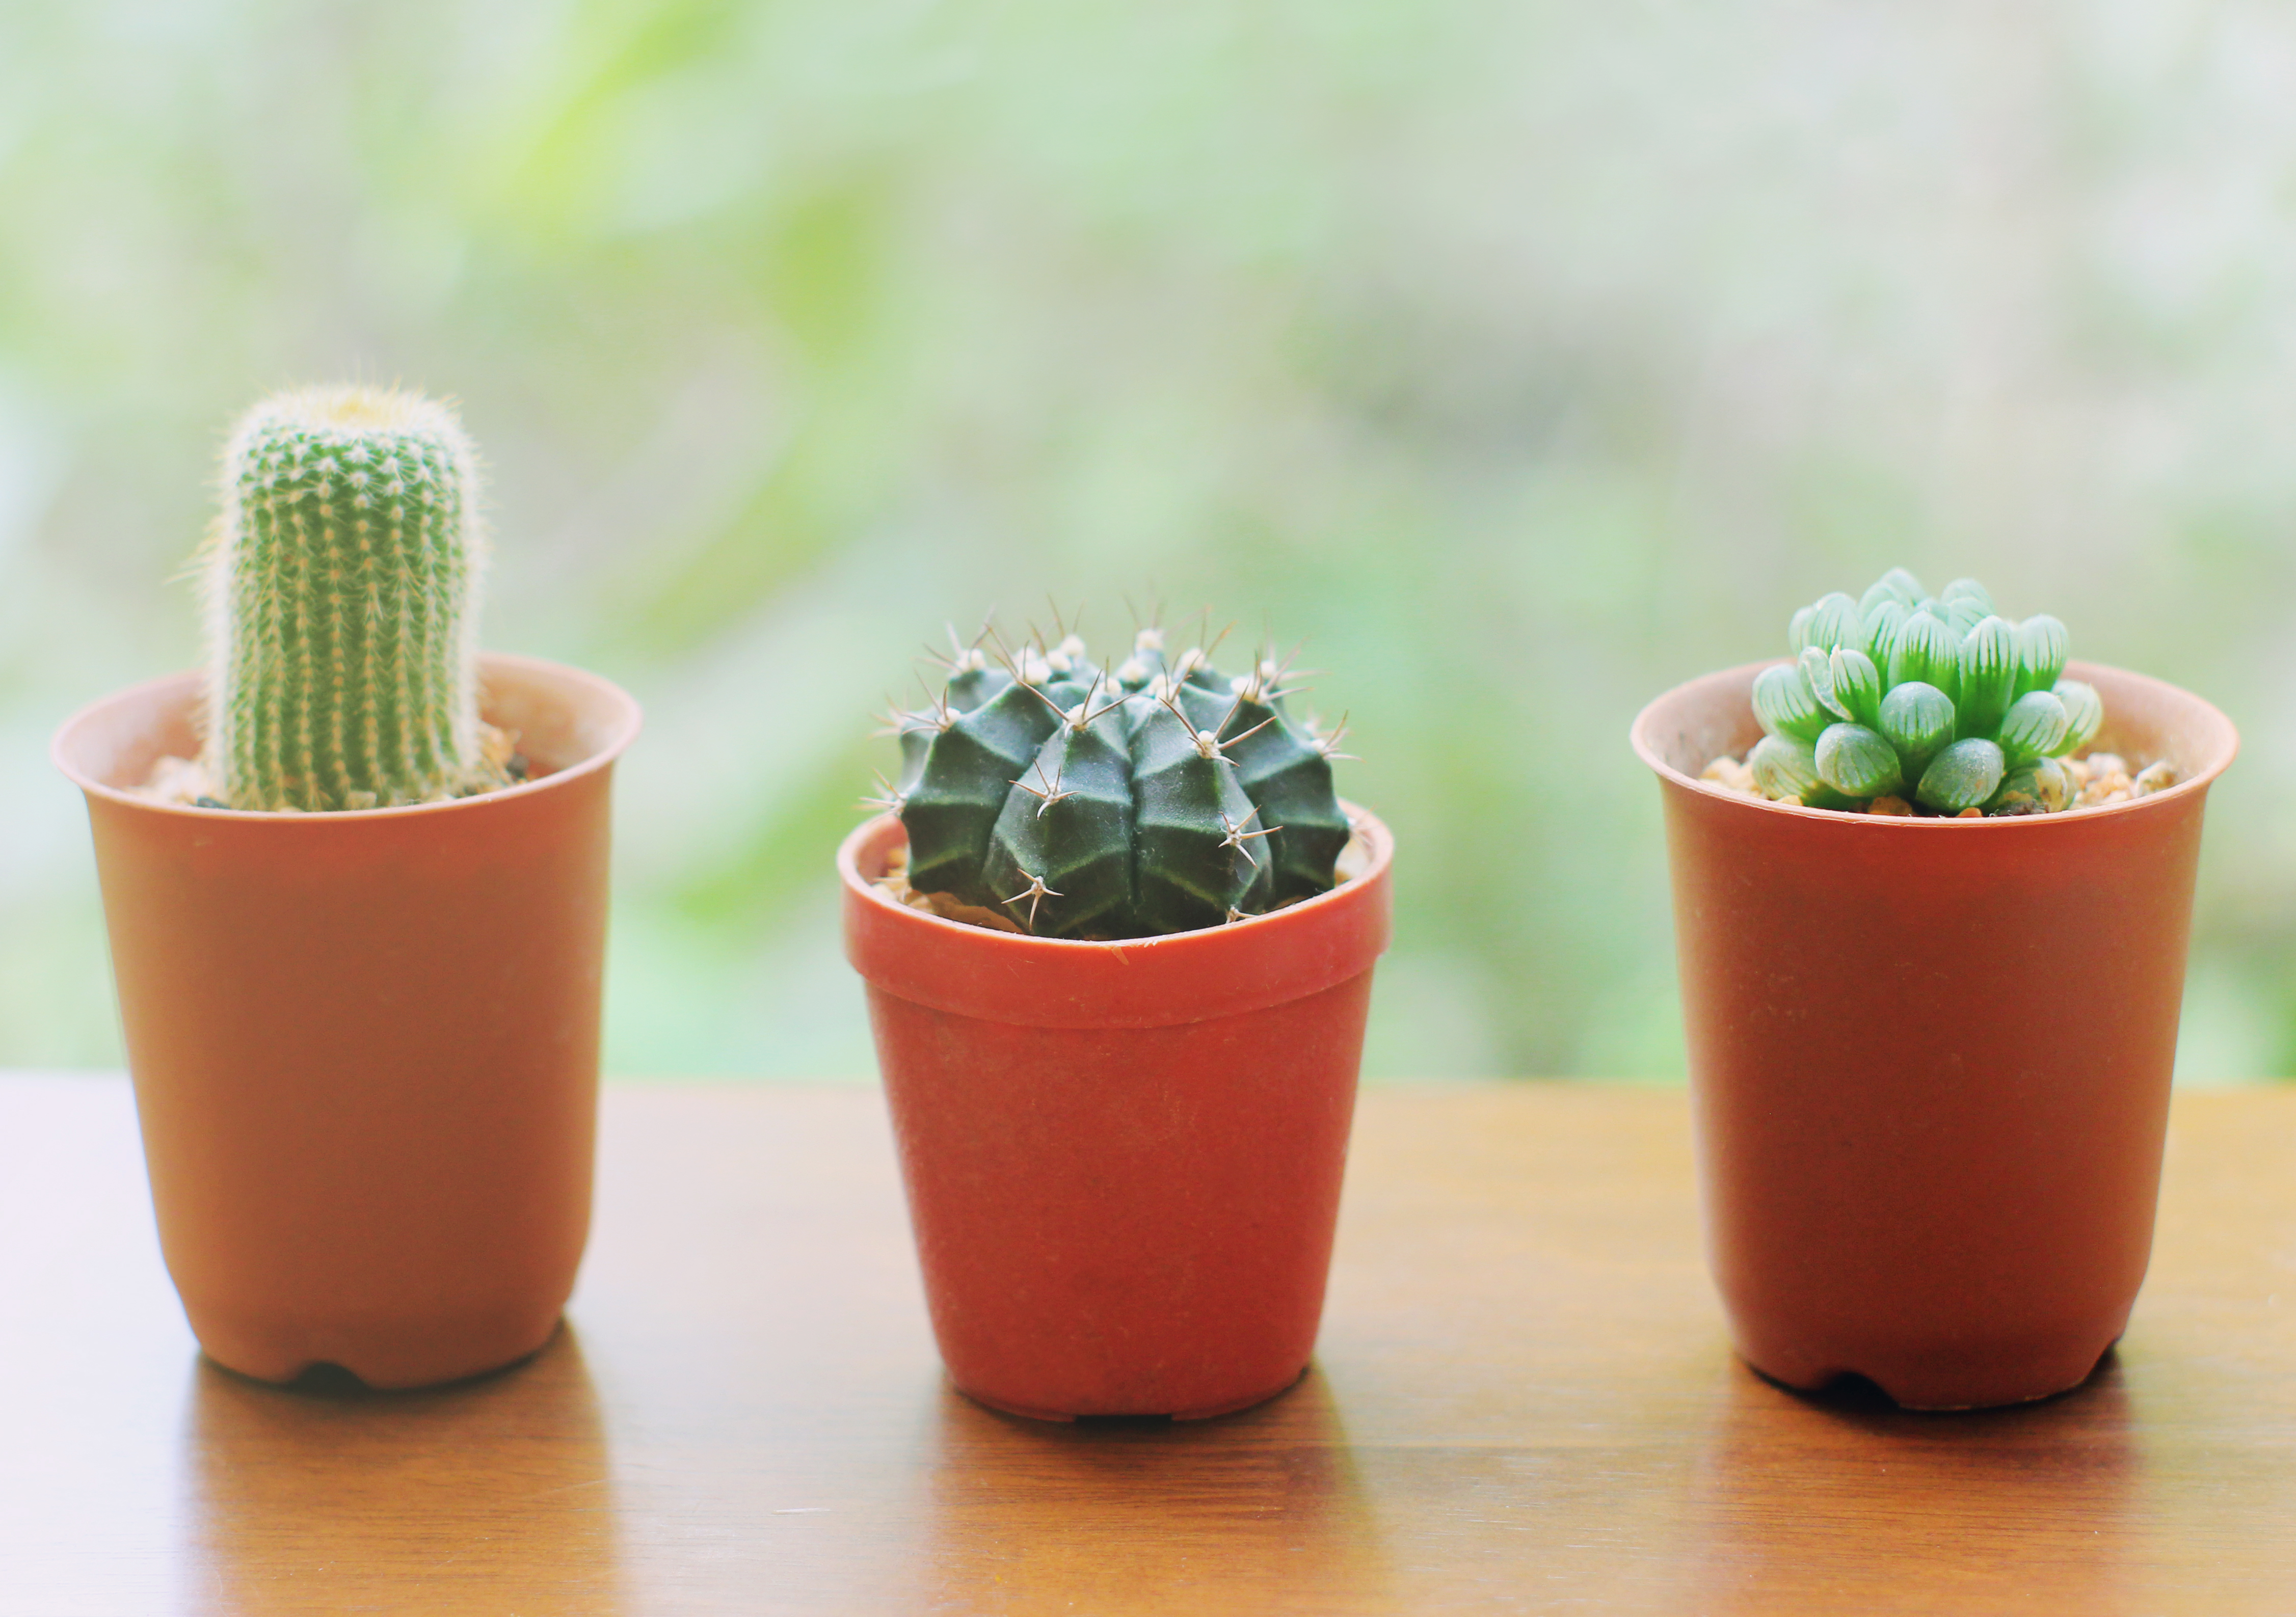 Small cactus for decorated with retro filter effect